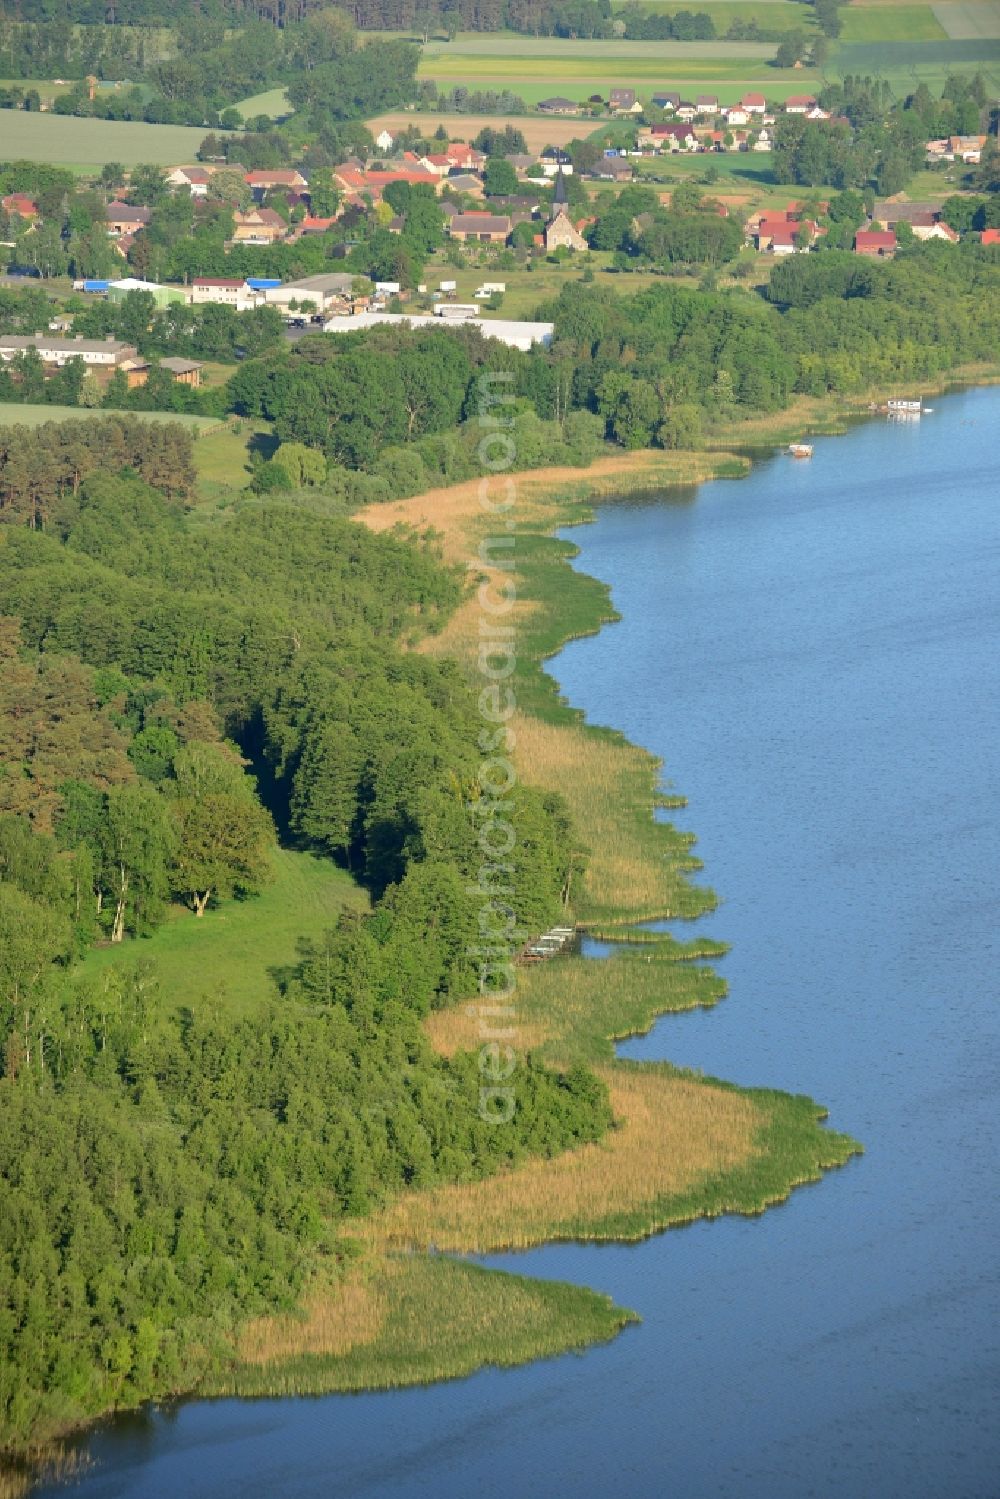 Aerial photograph Löwenberger Land - Shores of Dreetzsee lake in the borough of Loewenberger Land in the state of Brandenburg. The lake is surrounded by trees and forest, the next village is the Grueneberg part of the borough. The background shows the Teschendorf part